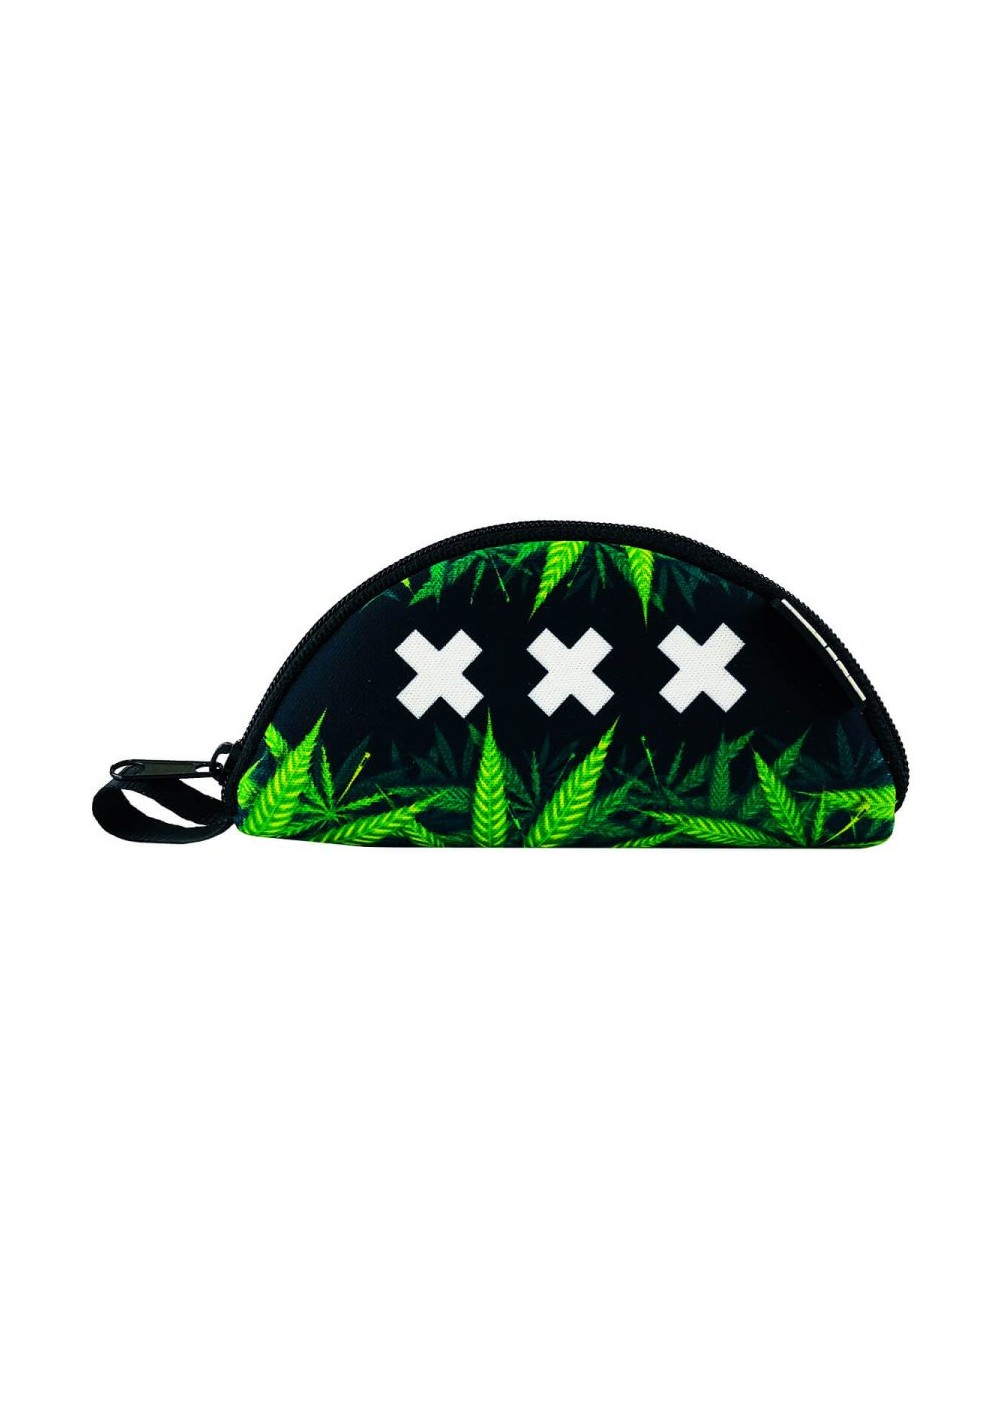 wPocket - Portable rolling ash try - Best Buds Weed Leaves